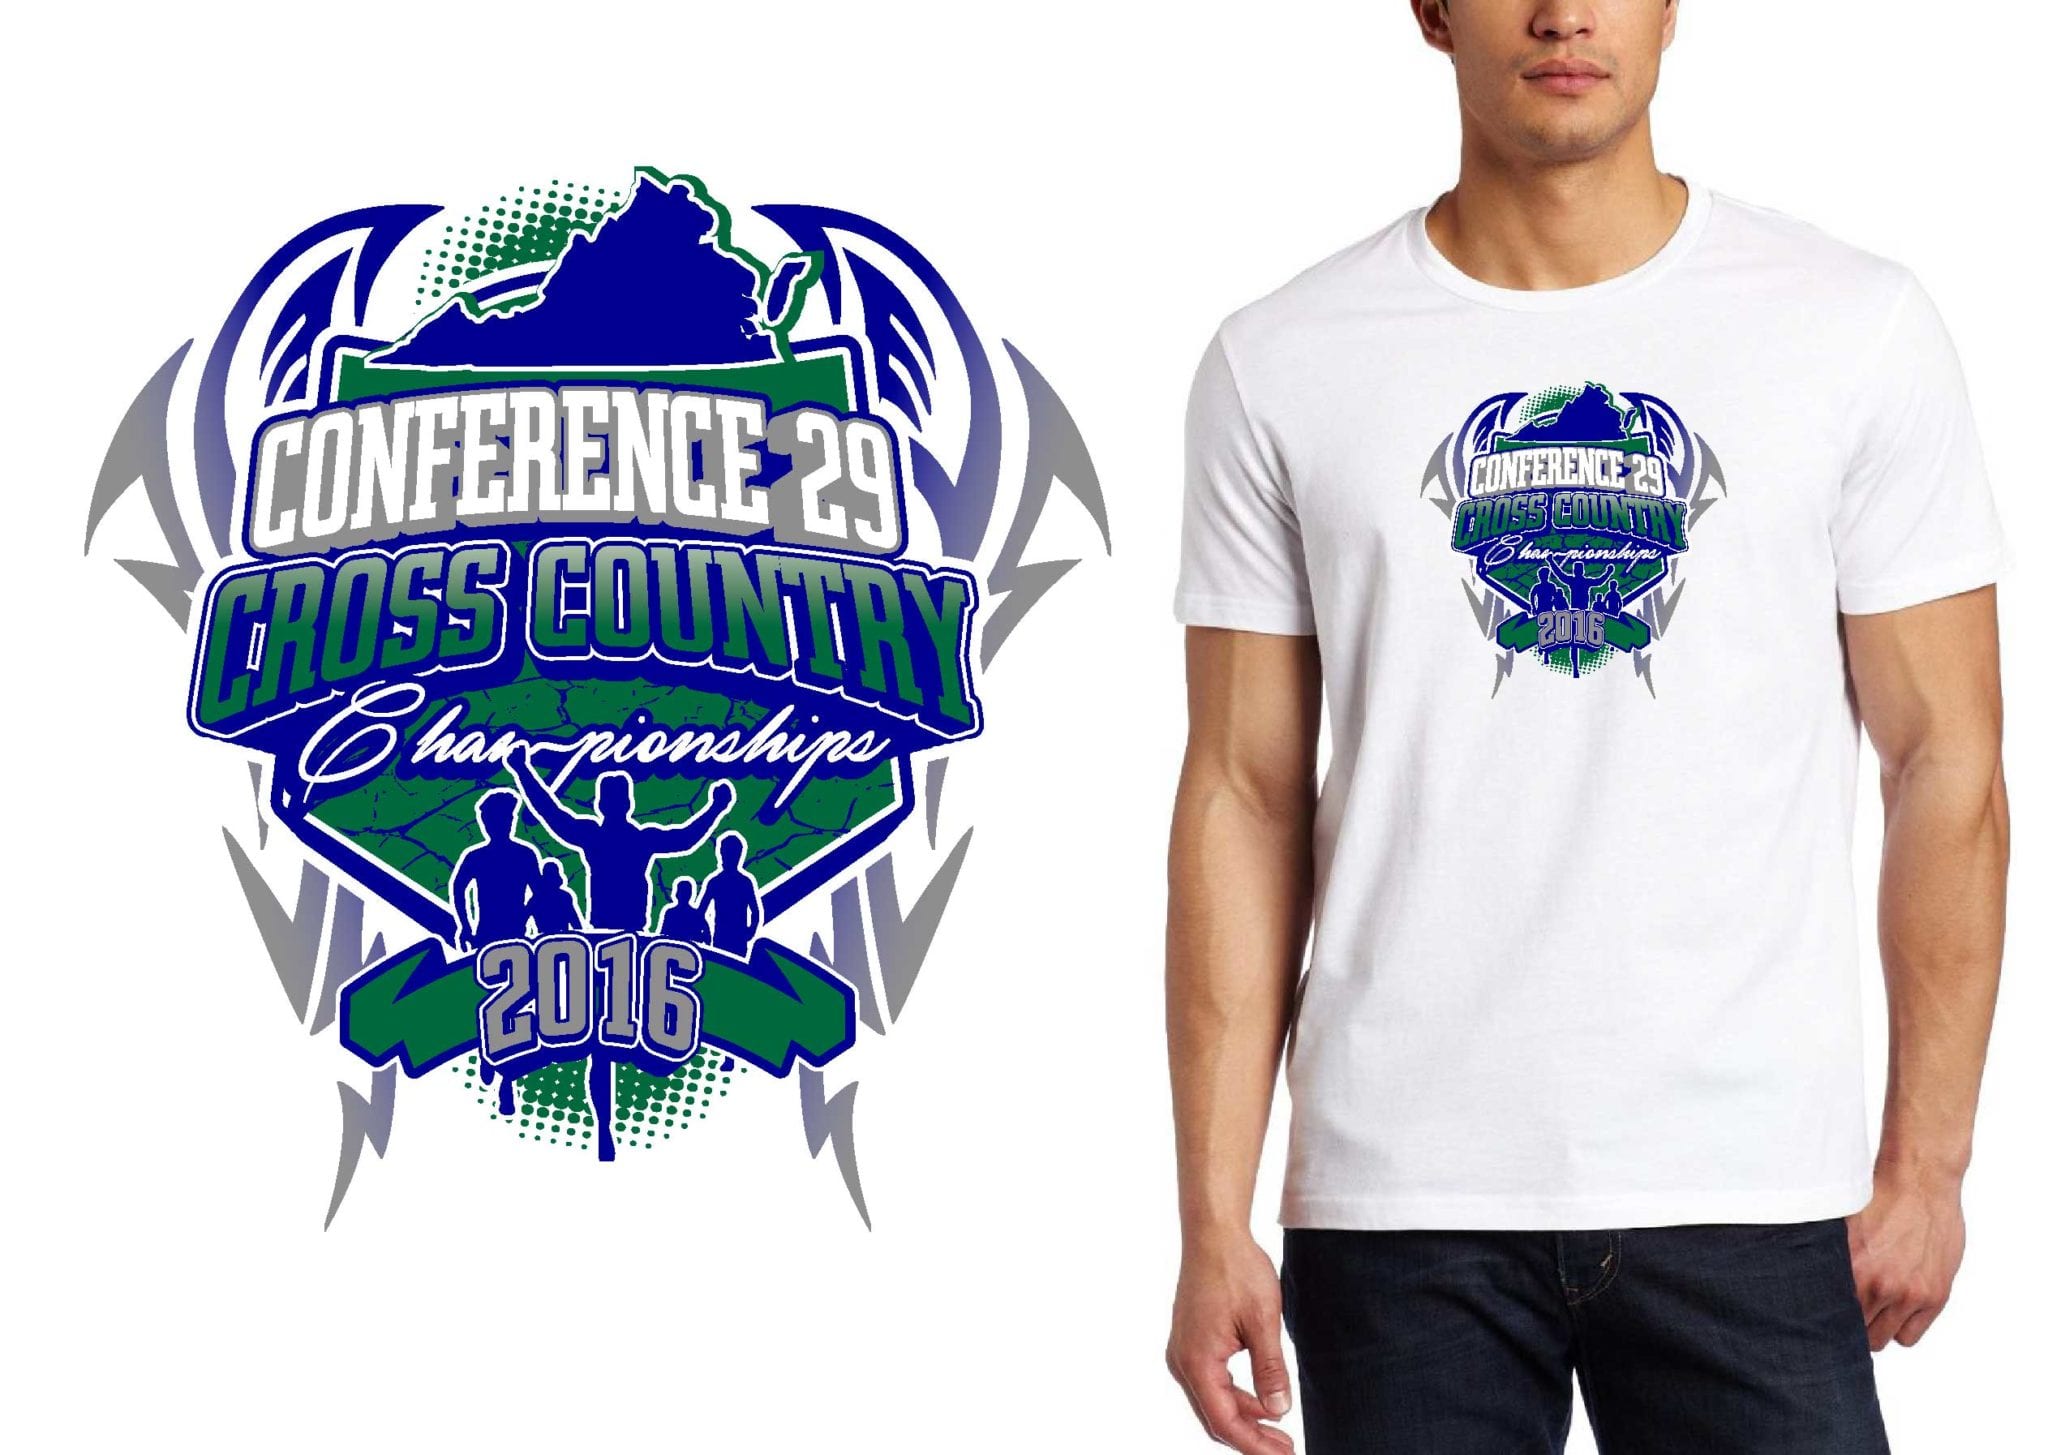 PRINT 16 Conference 29 Cross Country Championships cross country logo ...